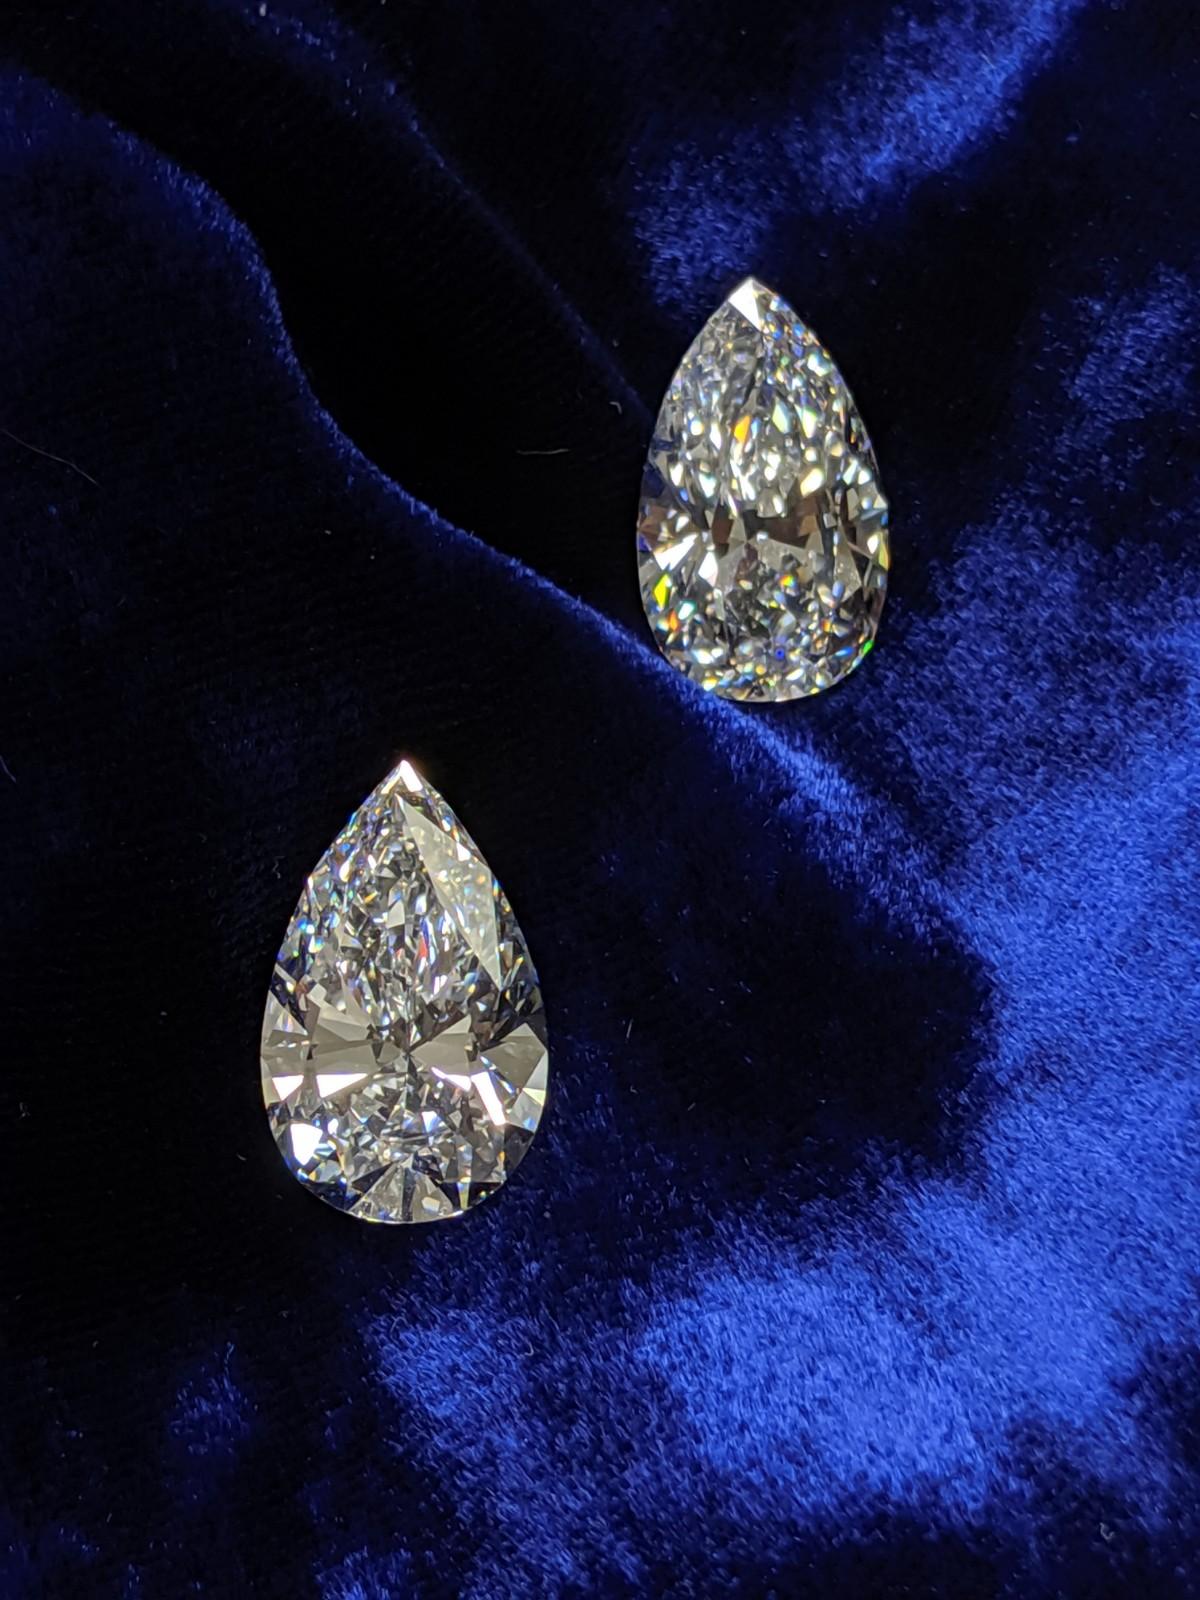 These top collector quality D Flawless Pear shape GIA graded diamonds are perfect for your next spectacular earring or necklace masterpiece. Priced and delivered as  unmounted  we also have the access to help you create custom design with world